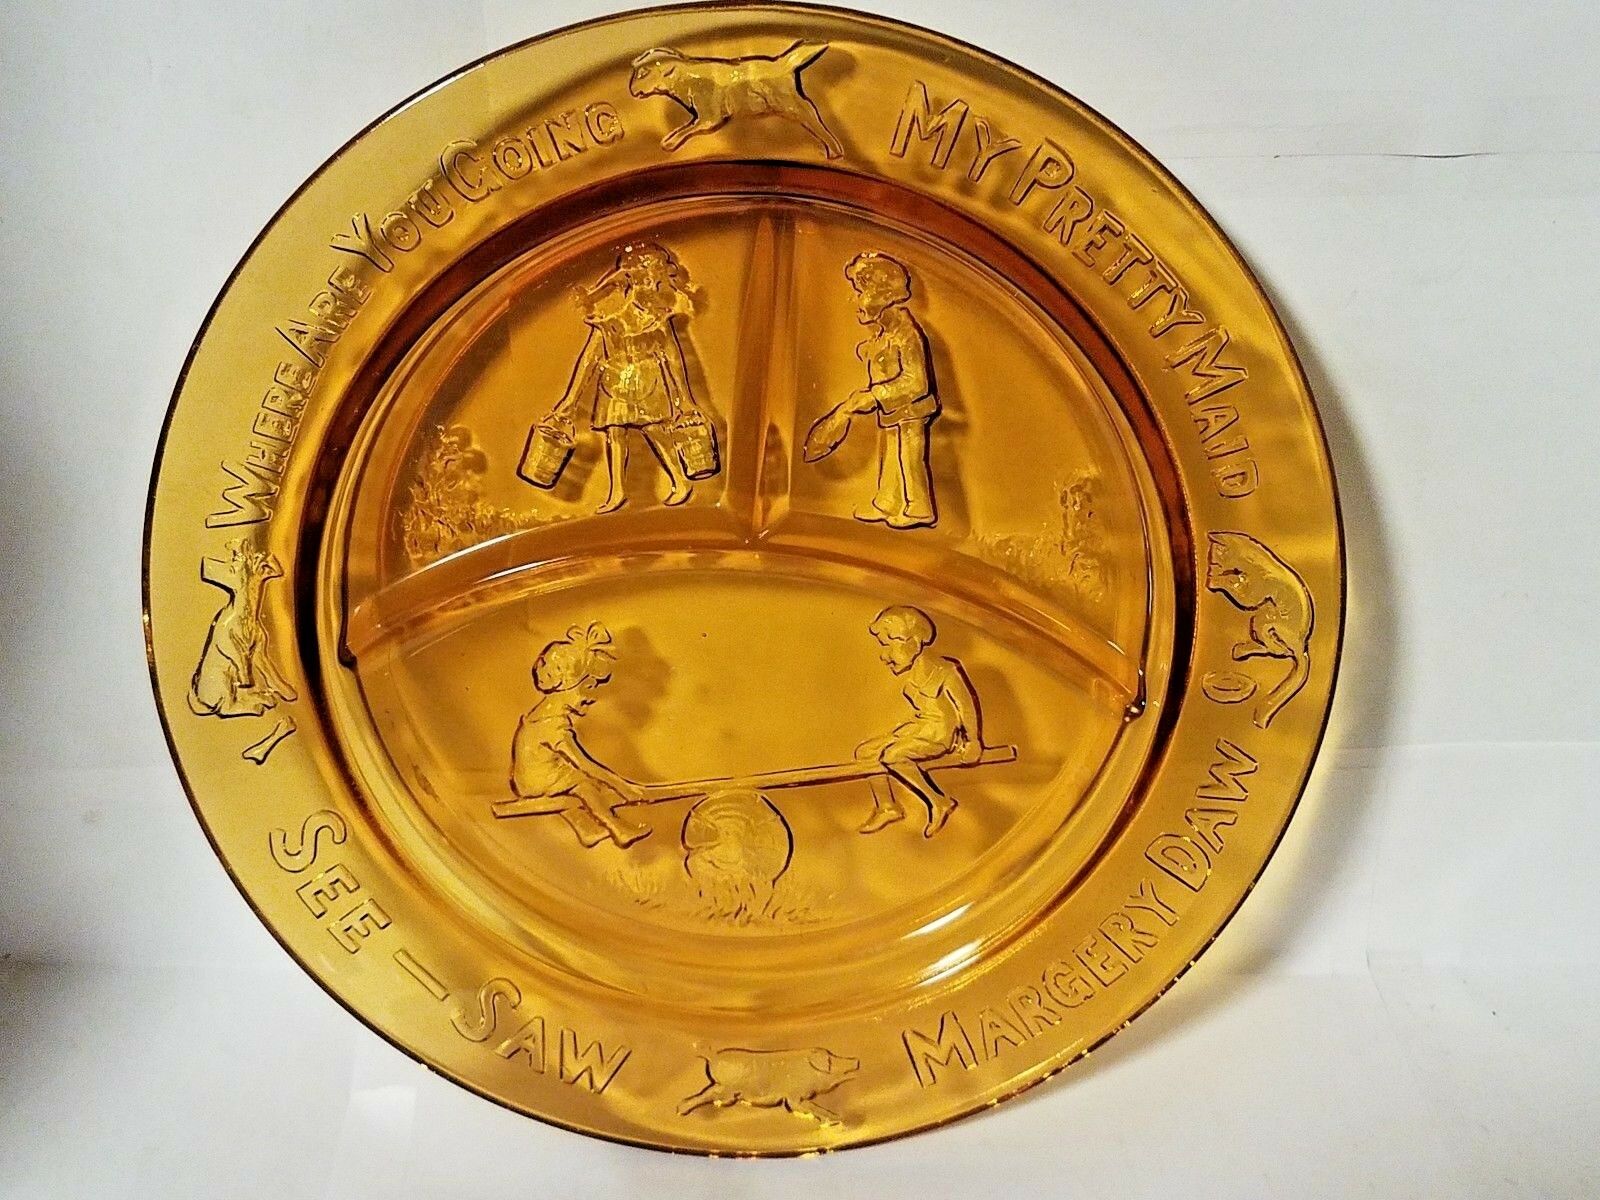 Collectible Child Nursery Amber Divided 8.5" Plate My Pretty Maid See-saw